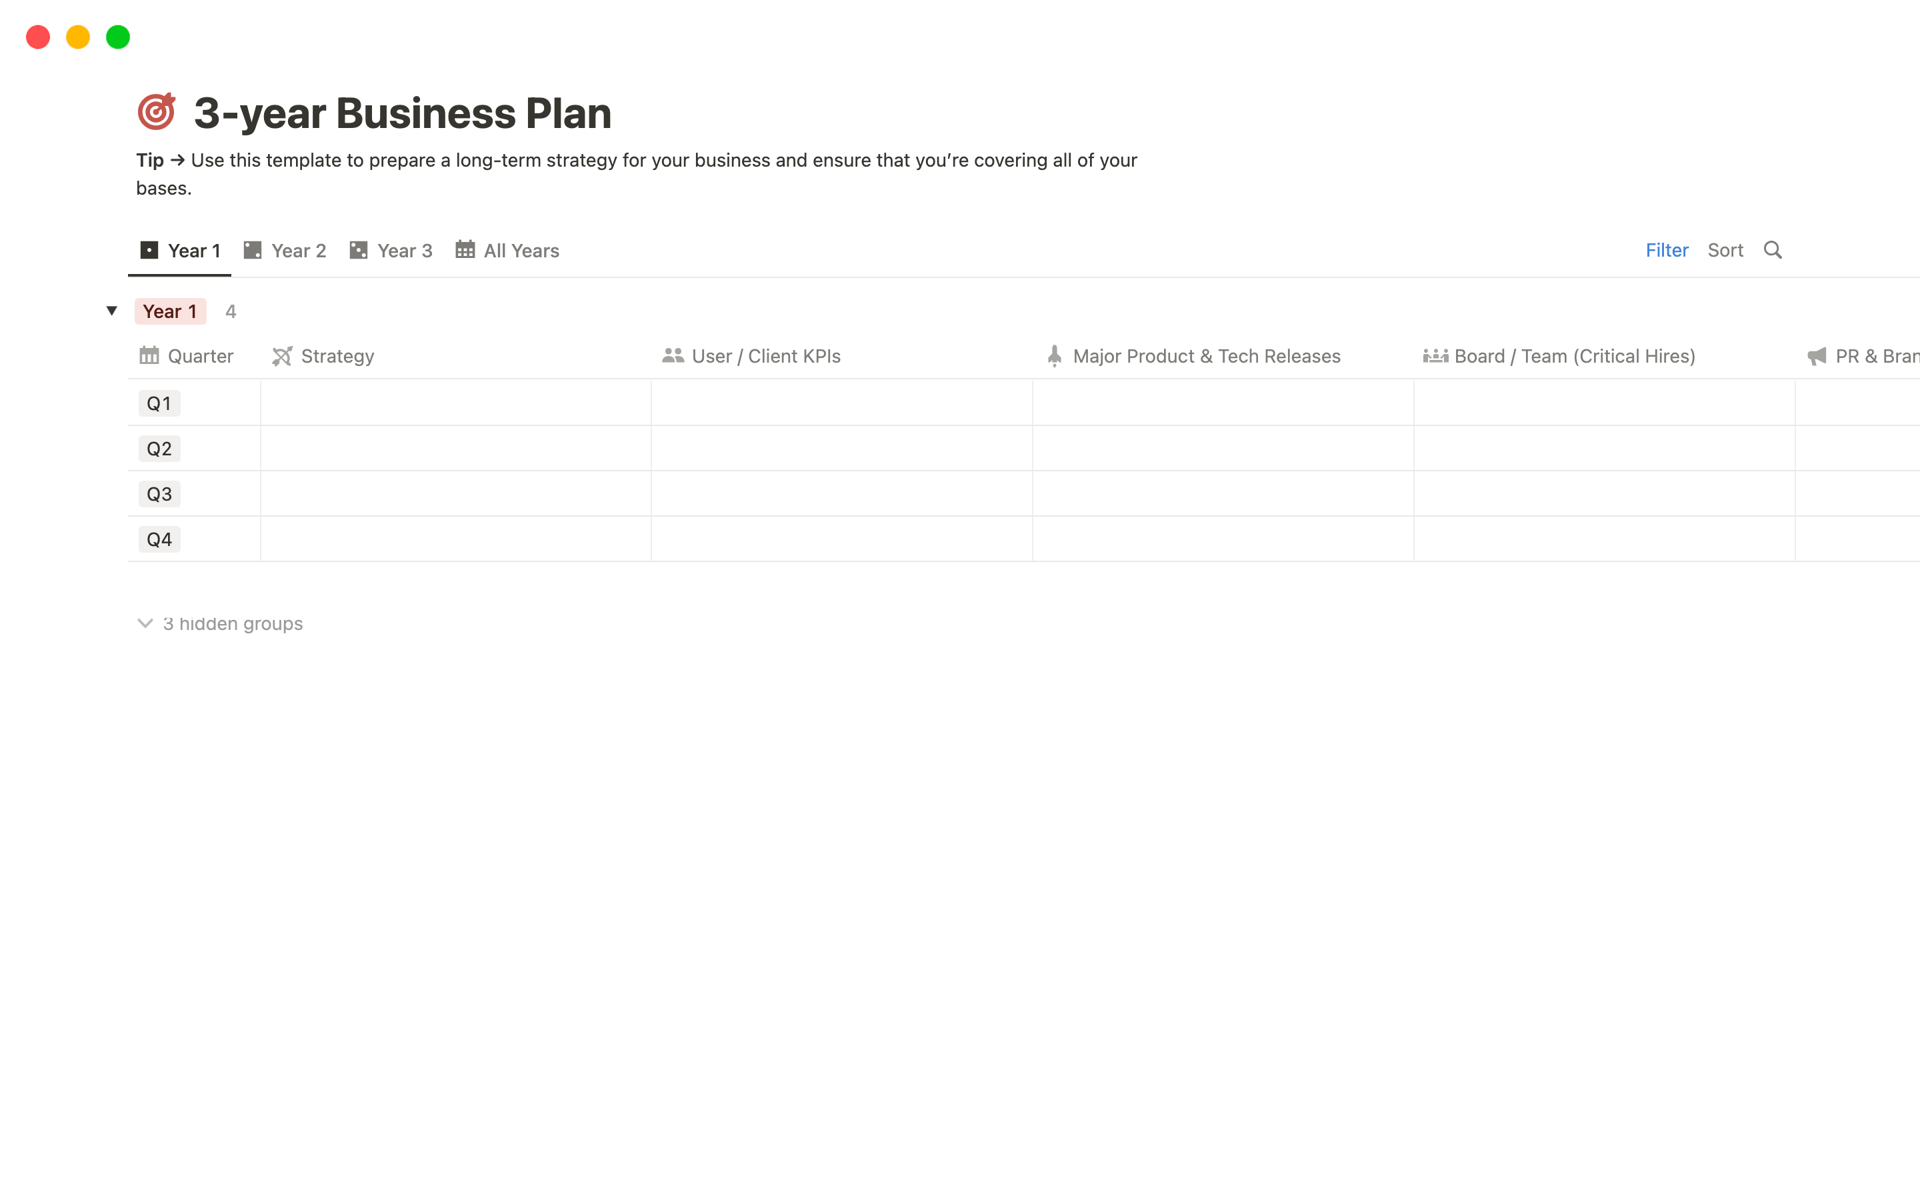 Give yourself long-term vision with this 3-year Business Plan template.